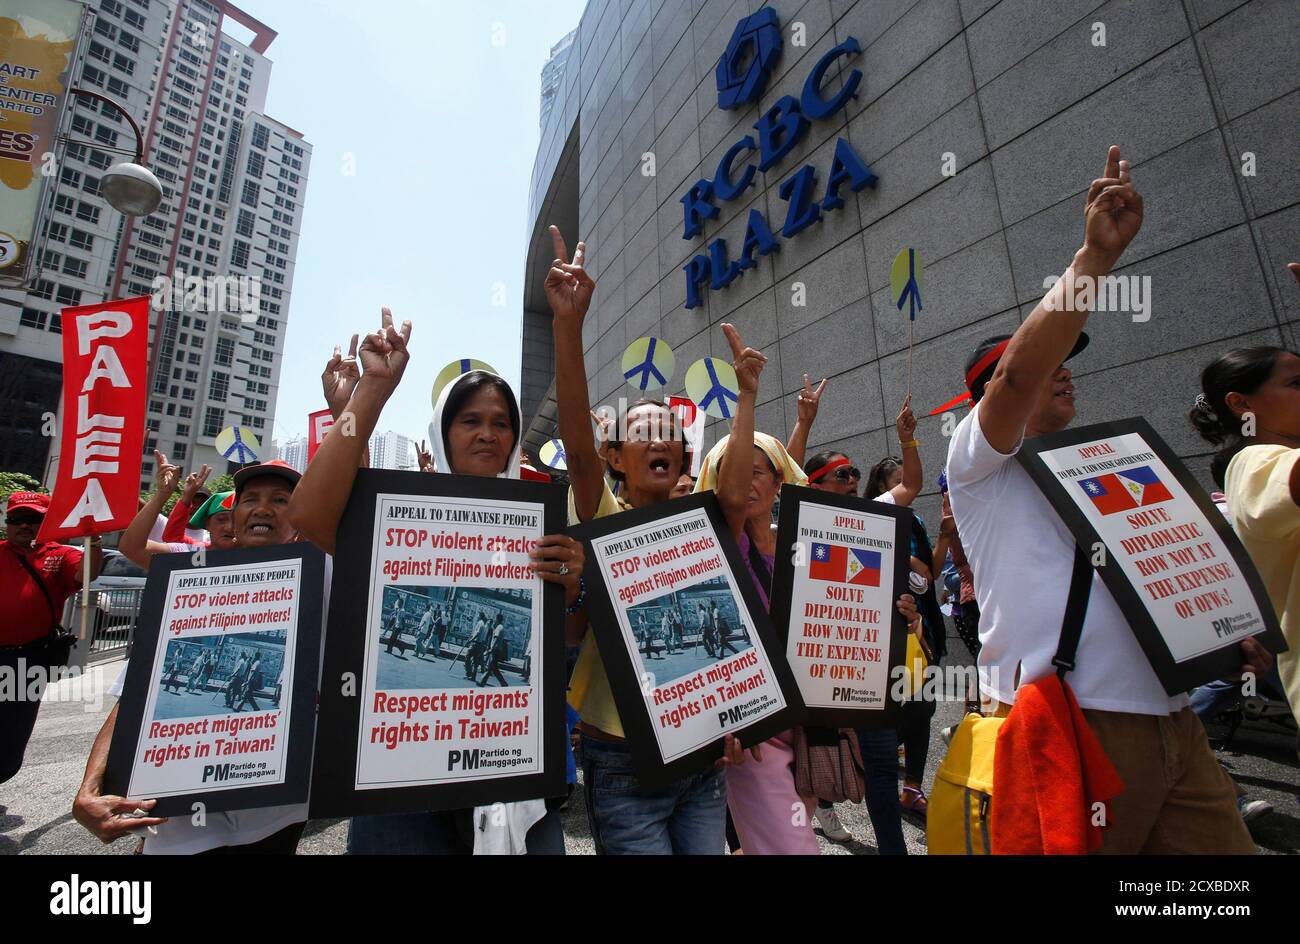 Filipino activists and overseas Filipino workers gesture as they chant slogans during a rally outside the premises of the Taipei Economic and Cultural Office (TECO) in Manila's Makati financial district May 22, 2013. Dozens of rallyists called on the Taiwanese government to ensure the safety and job security of tens of thousands of Filipinos working in Taiwan, according to a statement from a Filipino labor group. They also appealed to the Taiwanese people to refrain from using violence against Filipino workers who have nothing to do with the current political row between the two countries over Stock Photo